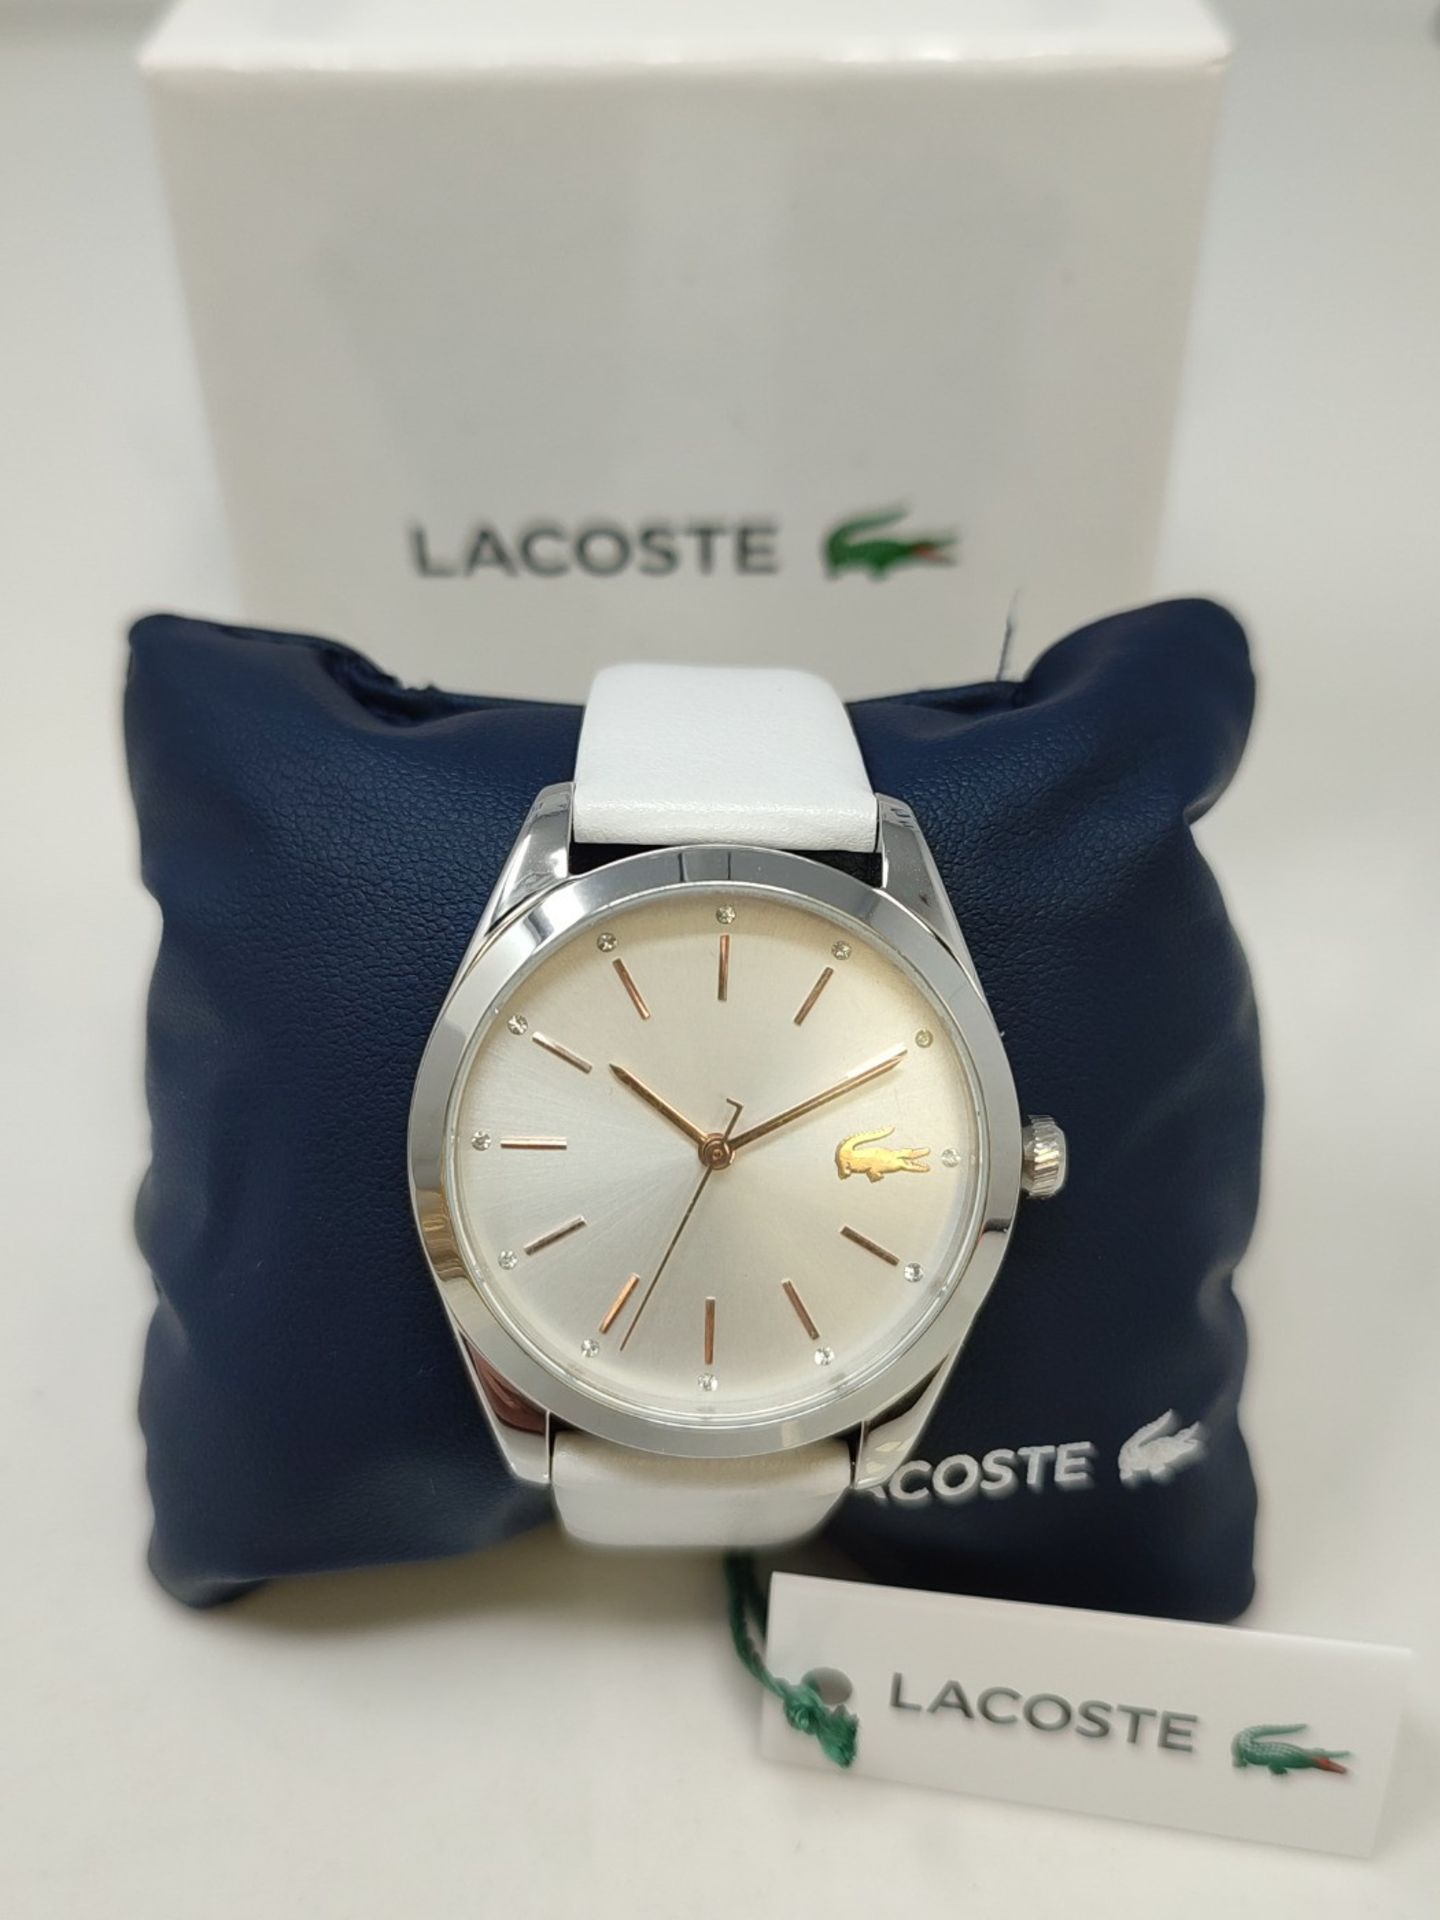 RRP £119.00 Lacoste analog quartz watch for women with white leather strap - 2001159 - Image 2 of 3